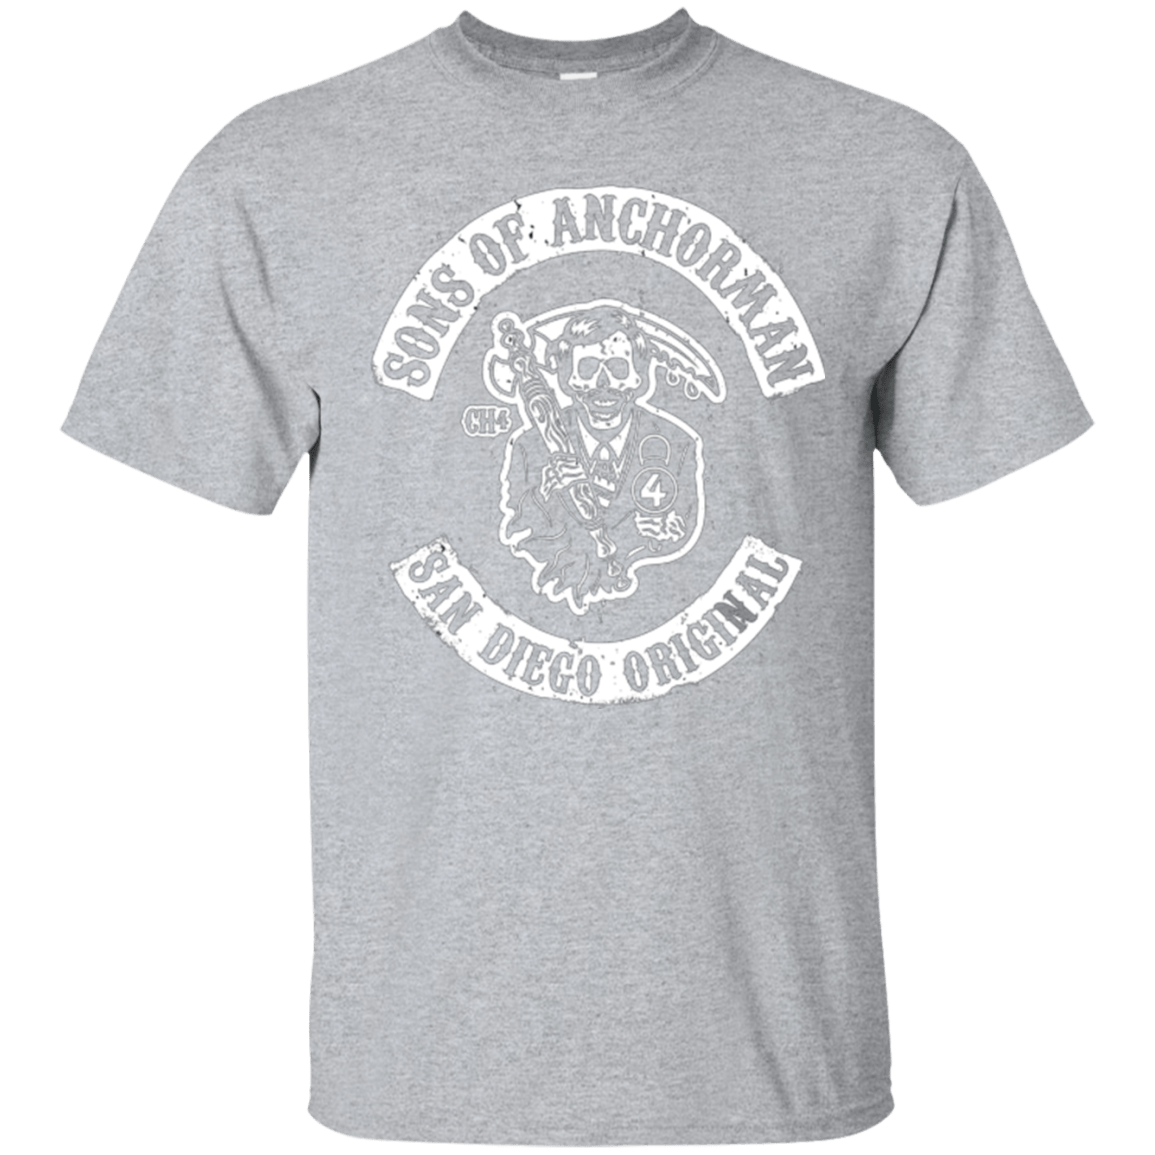 T-Shirts Sport Grey / Small Sons of Anchorman T-Shirt